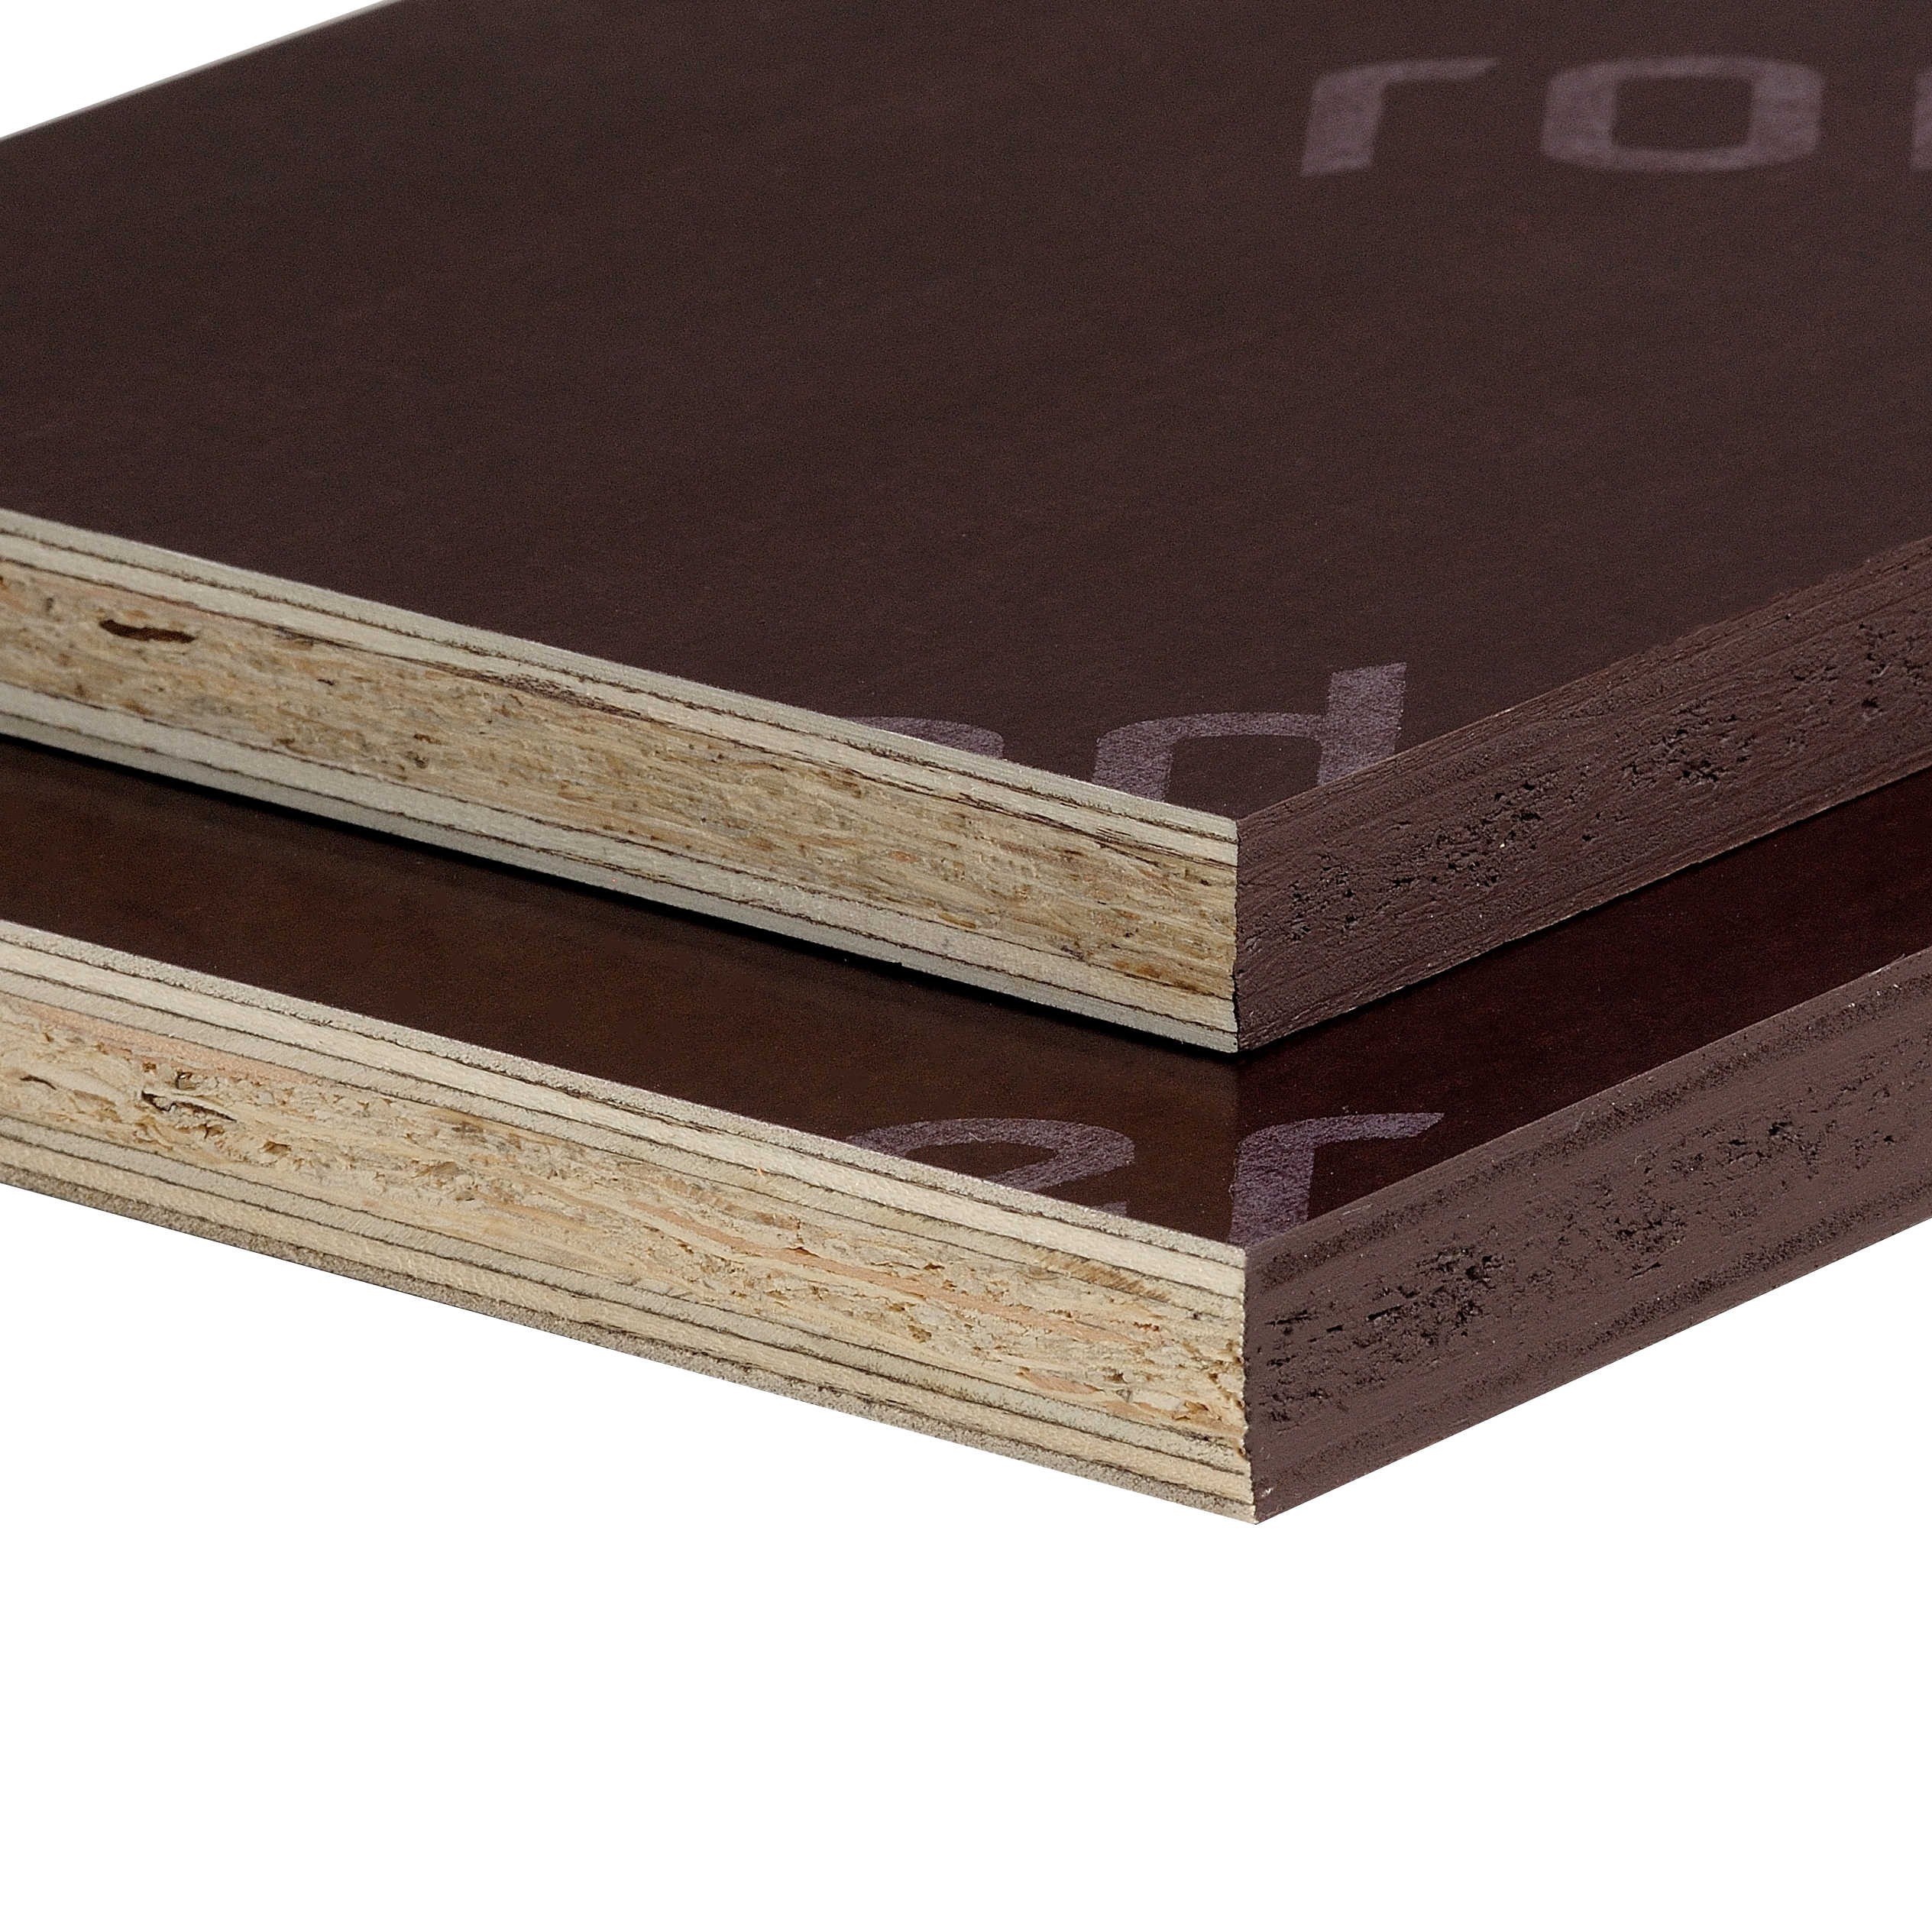 Plywood - TEGO formwork plywood 21 mm thickness, 1220 x 2440 mm class C, https:maxbau.ro